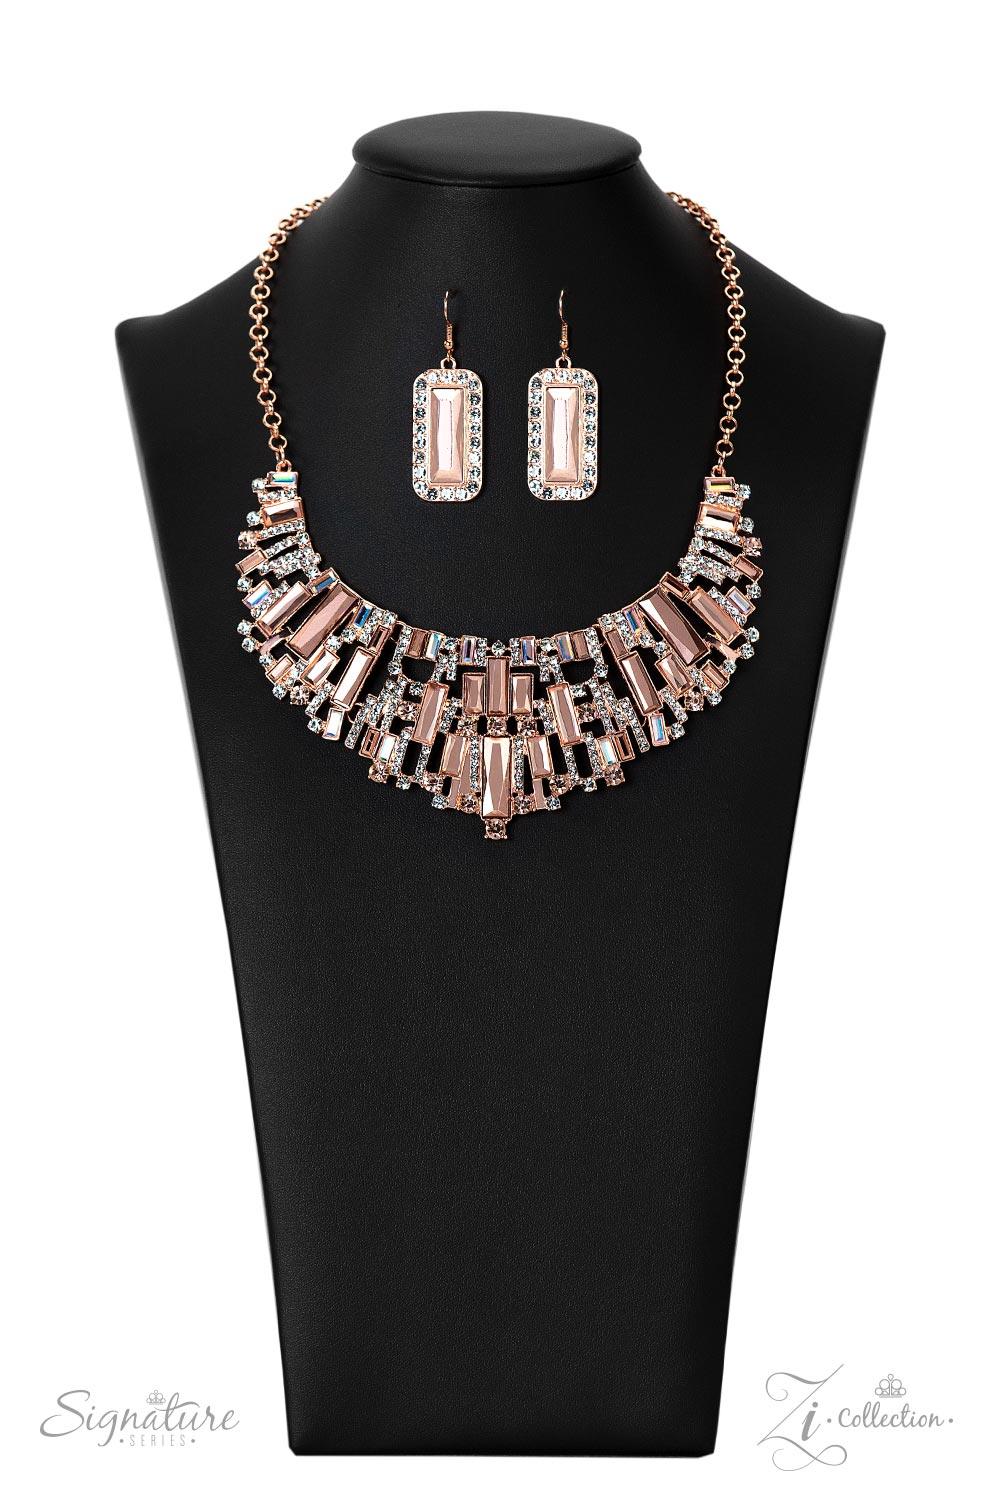 Paparazzi Accessories The Deborah An infinite display of iridescent bars, shiny copper bars with a metallic and reflective finish, white rhinestones, rhinestones with peach-colored undertones, and shiny copper bars studded with dazzling white rhinestones